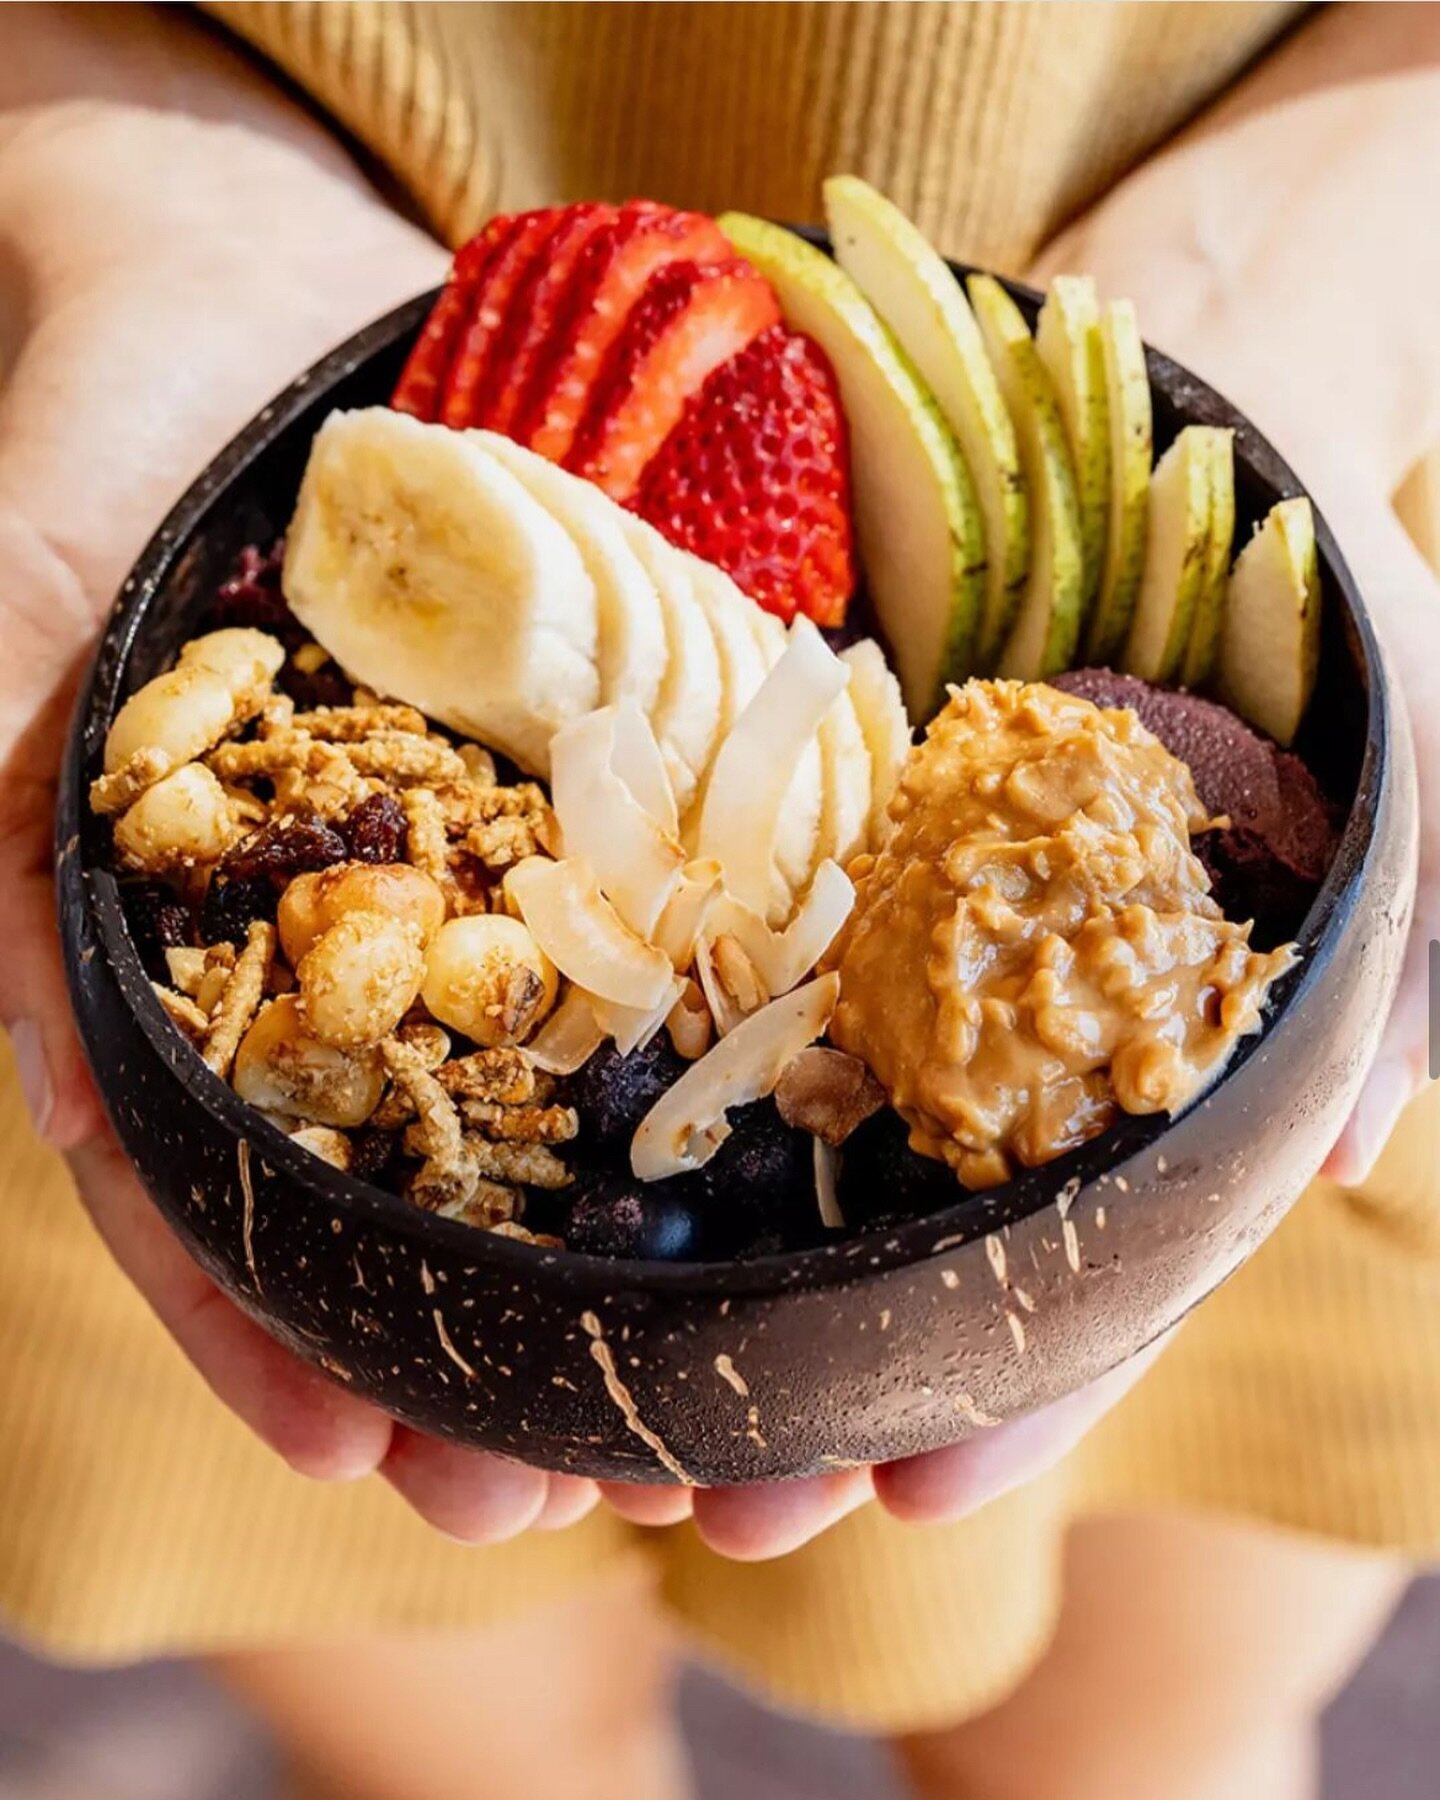 Perfect match: Summer days and Acai bowl @busy_bird_coffee